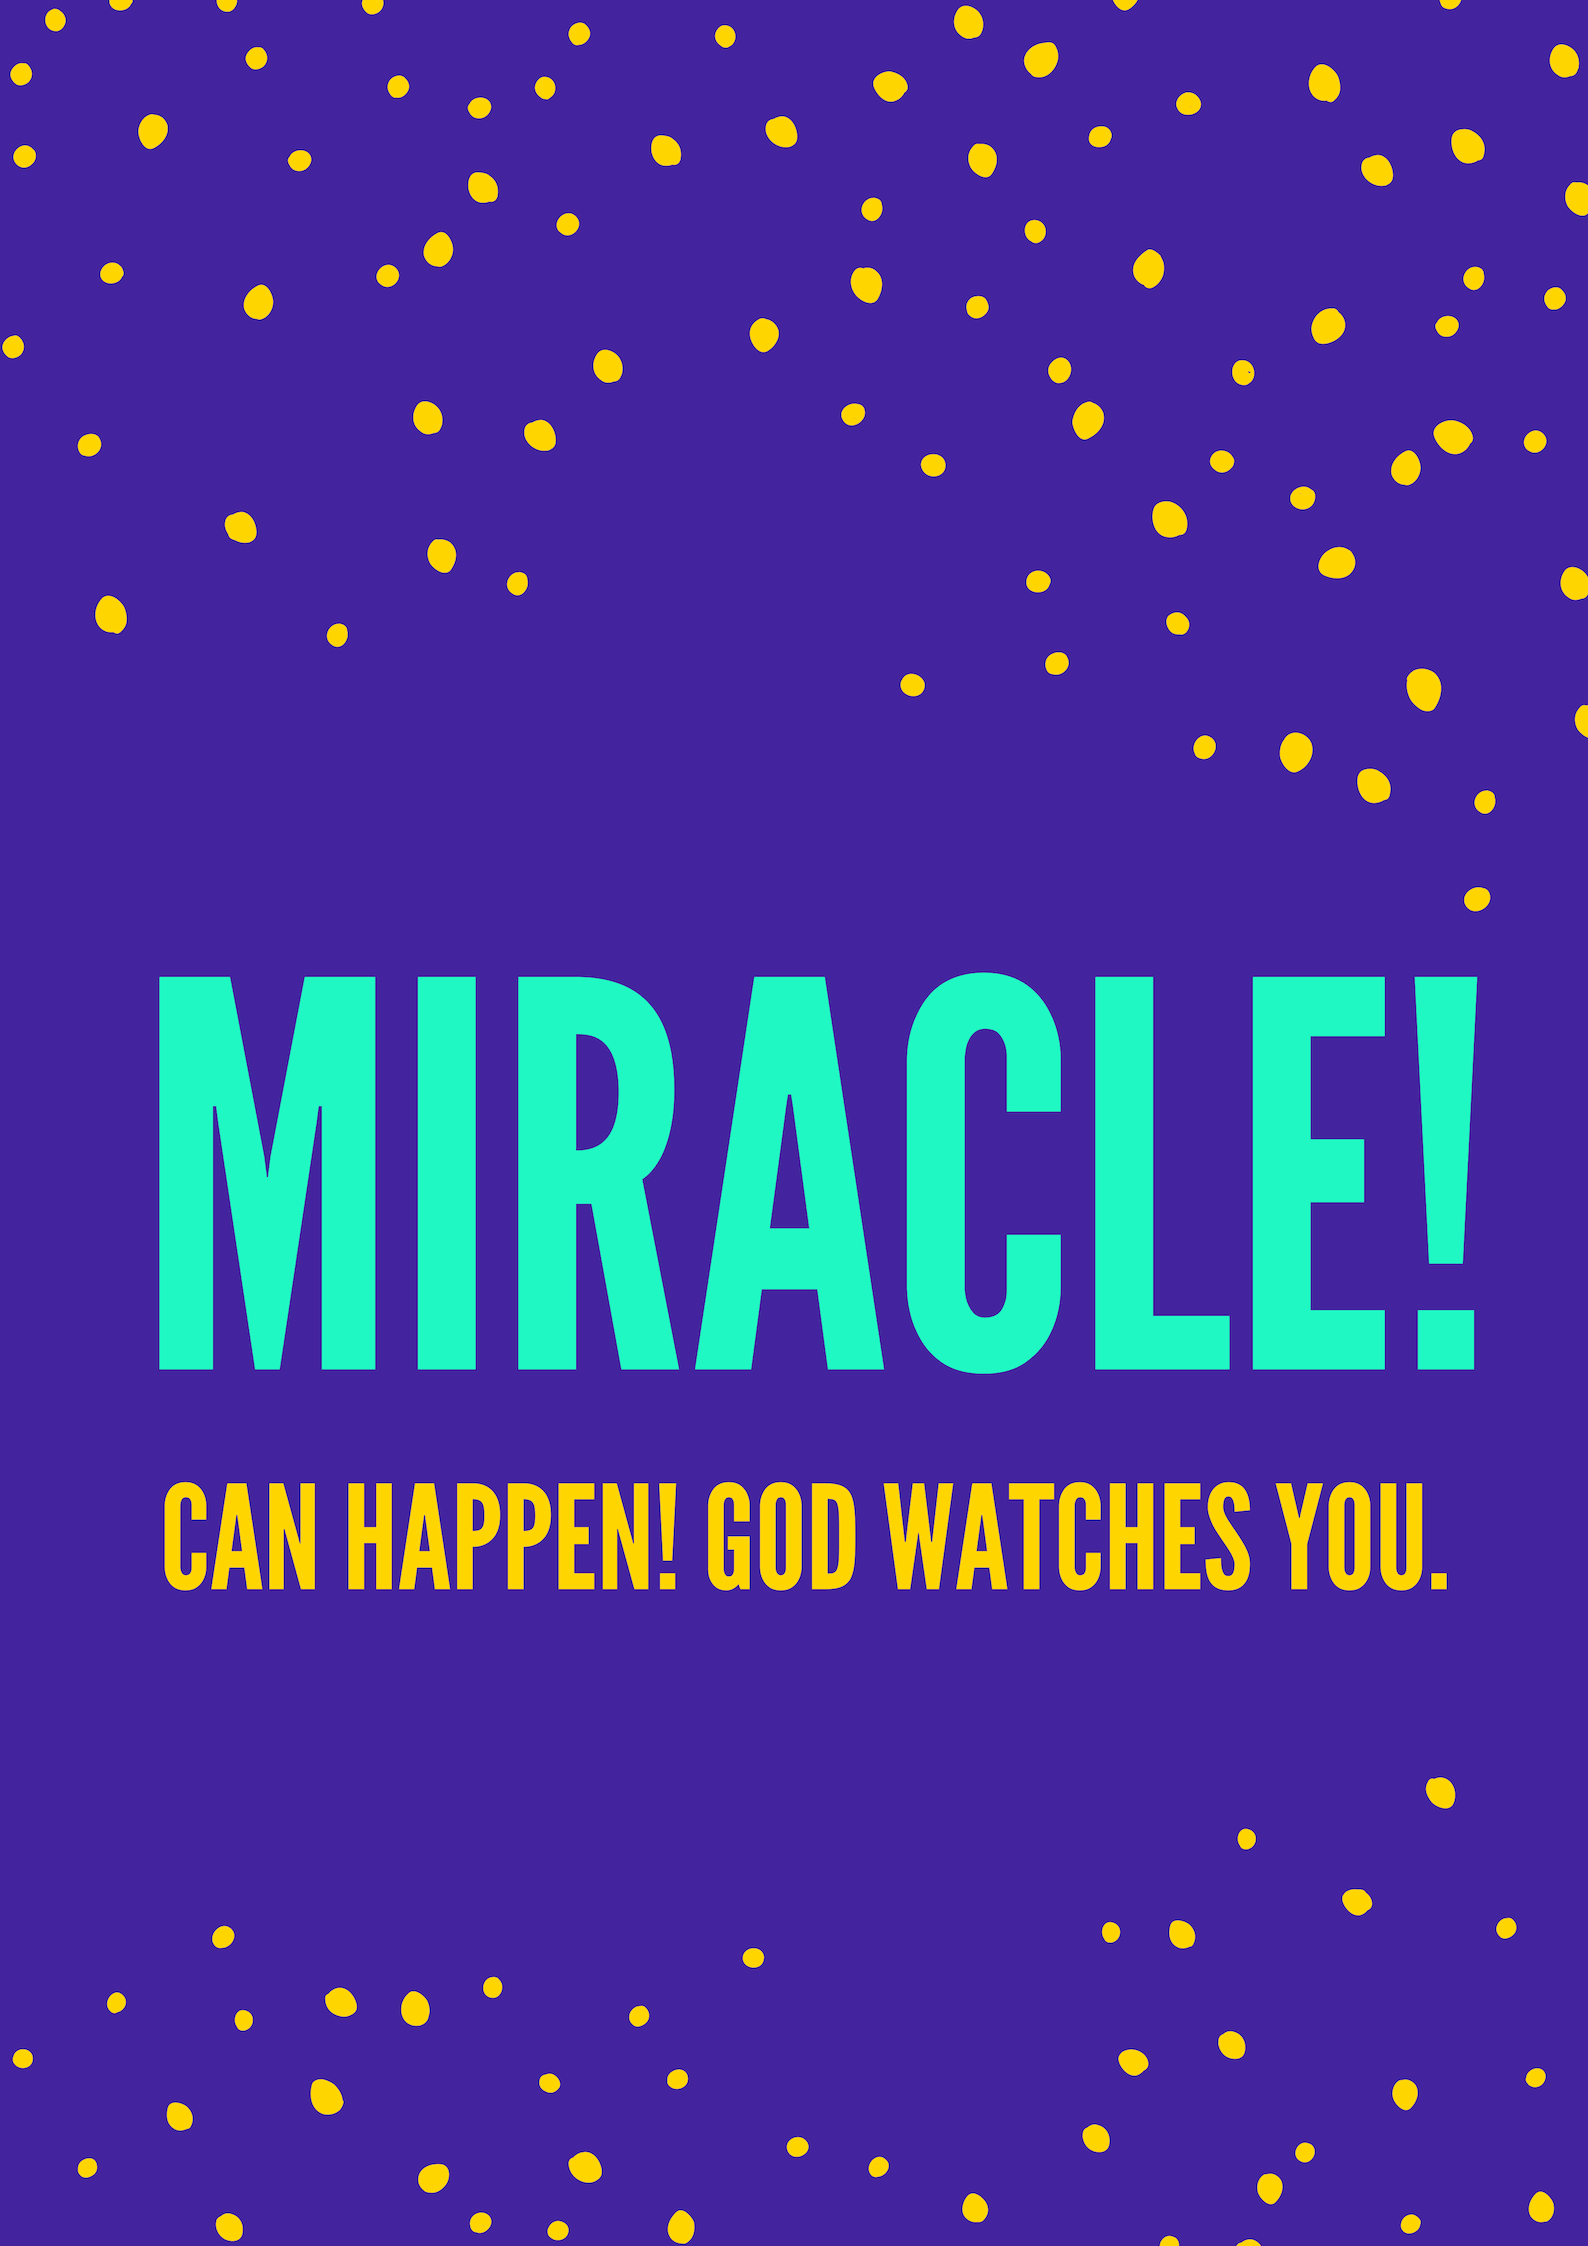 Miracles happen in this fastpaced life too!